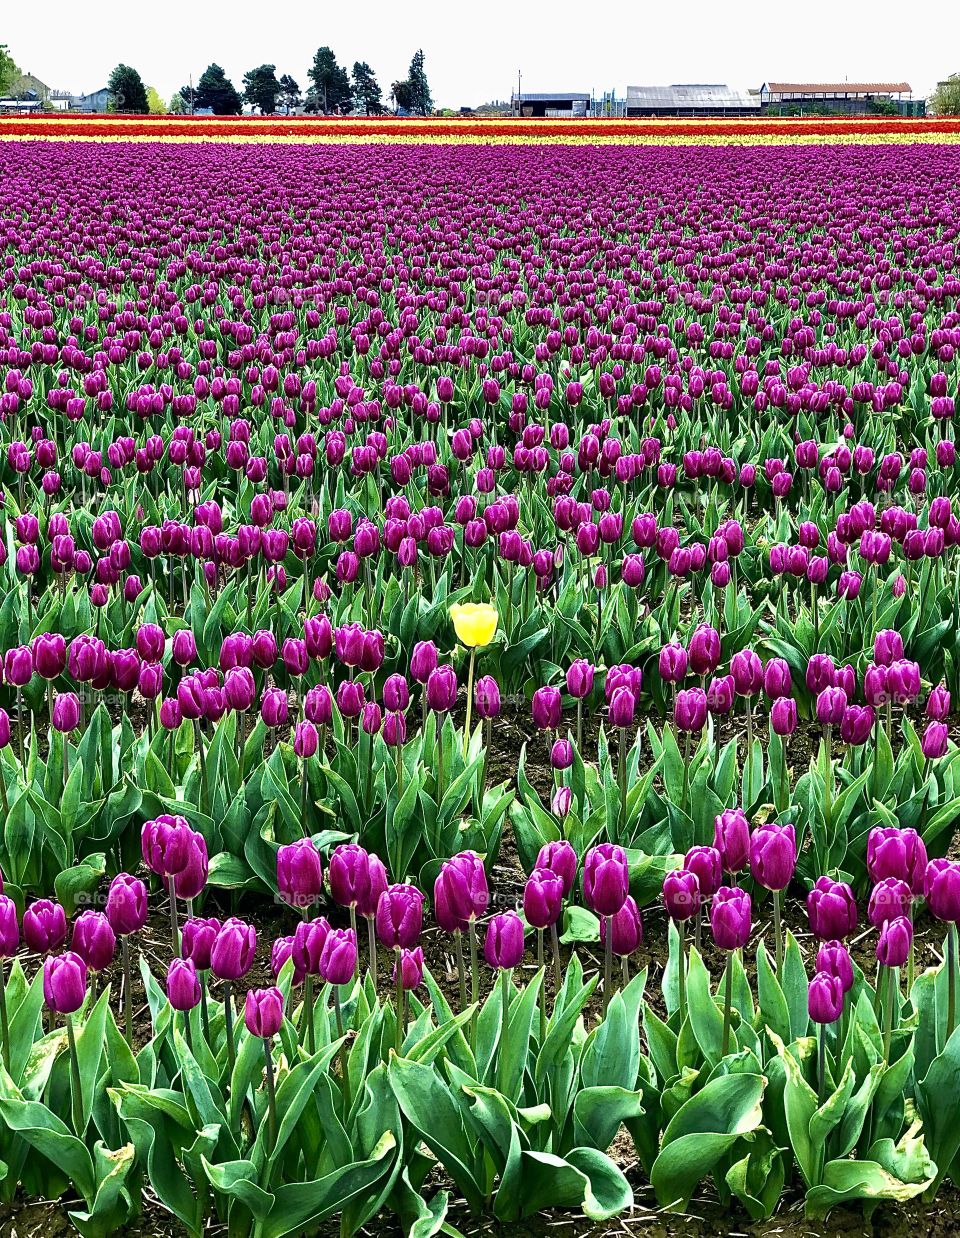 Foap Mission “Springtime”! Stunning Fields of Unique Purple Tulips With One Single Yellow Tulip In The Center! 